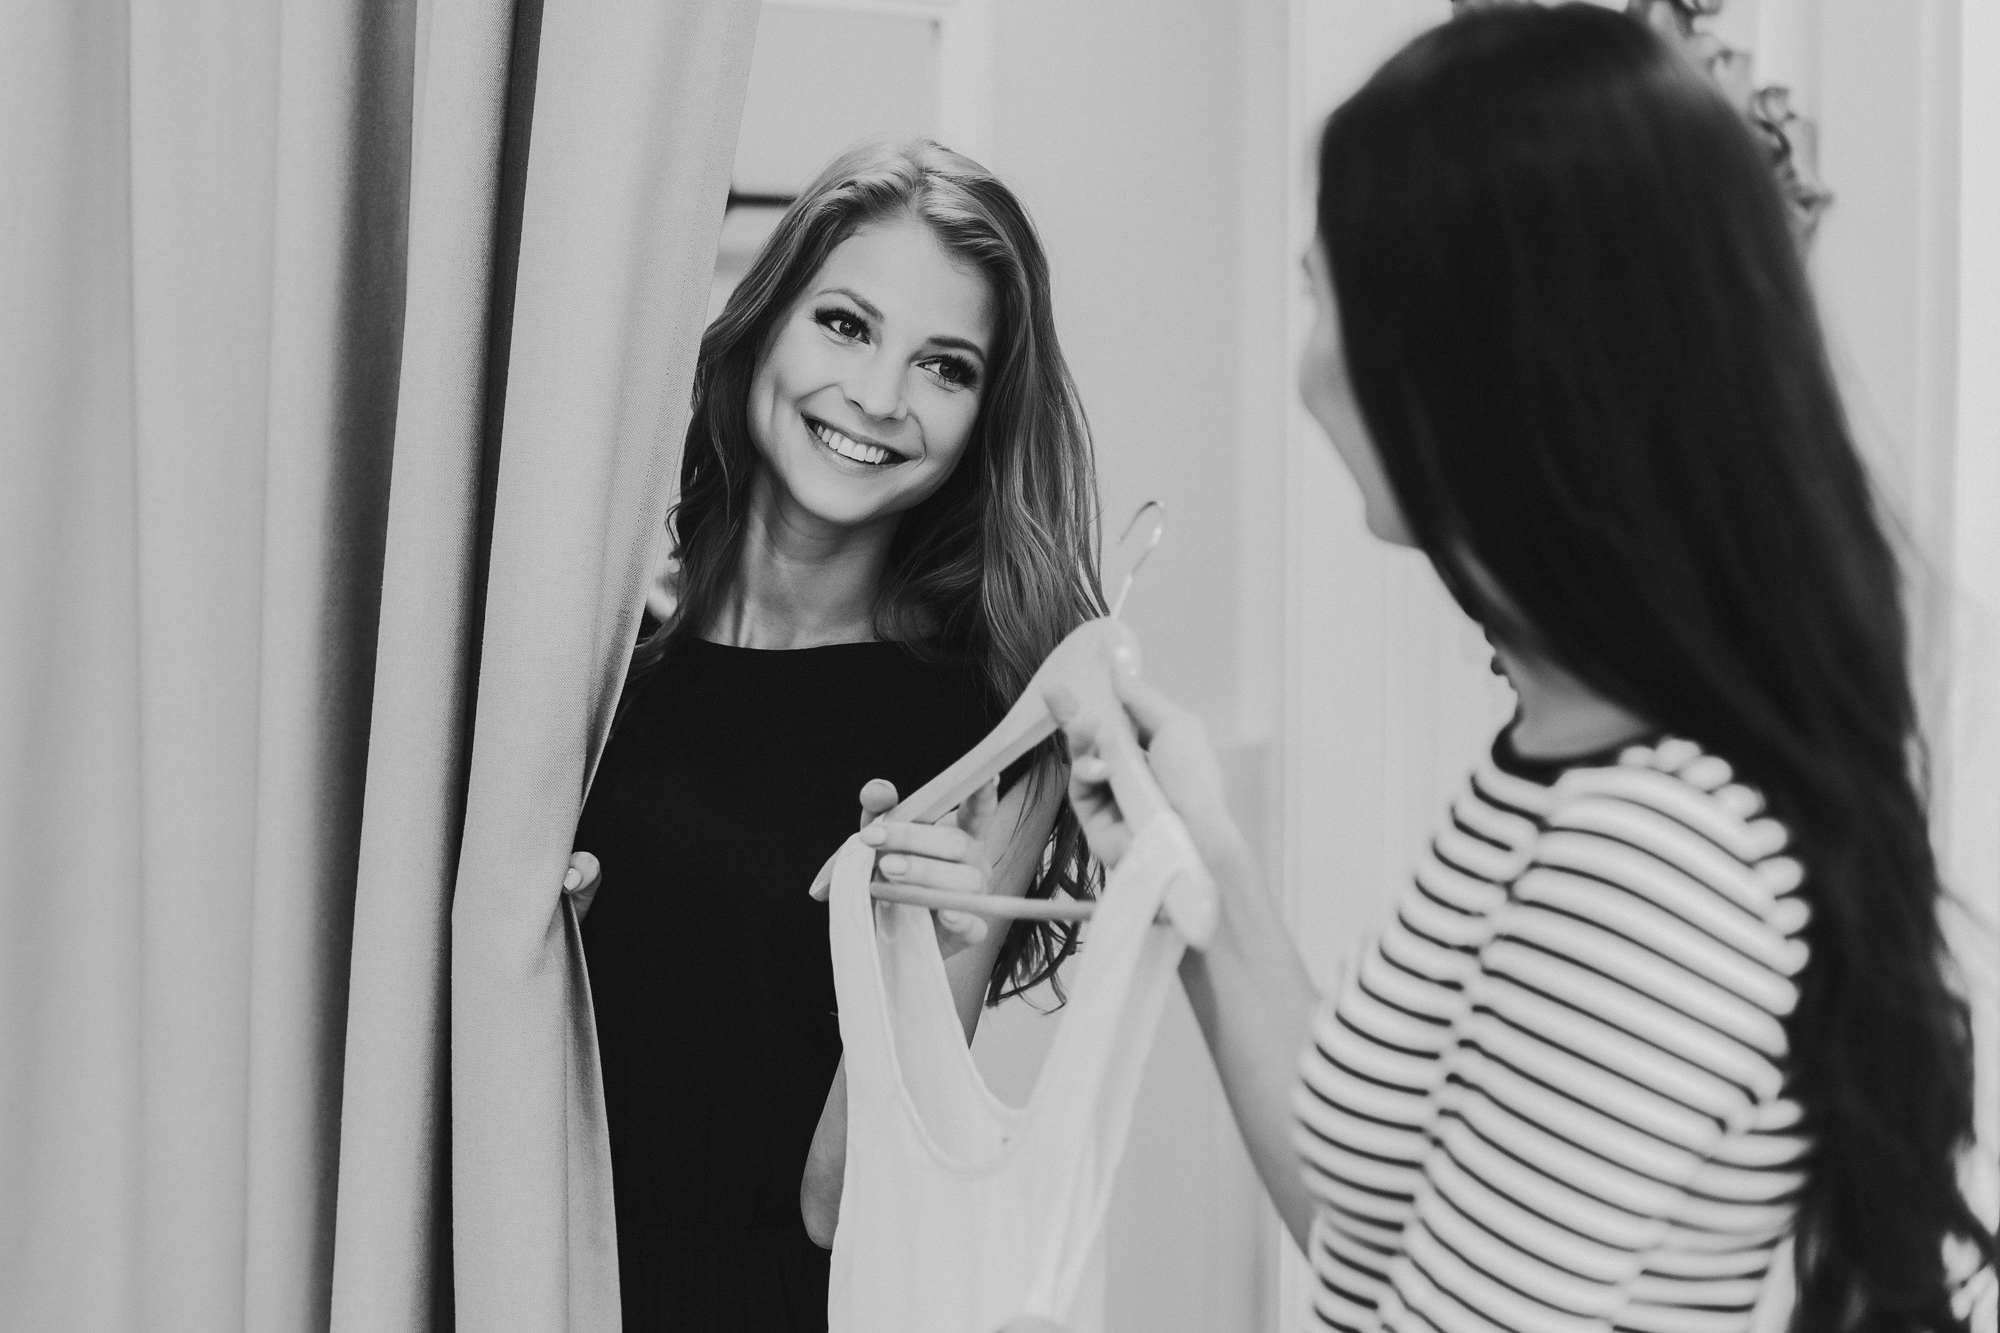 Why the fitting room is the best place to get new Clients - Personal  Stylist Training